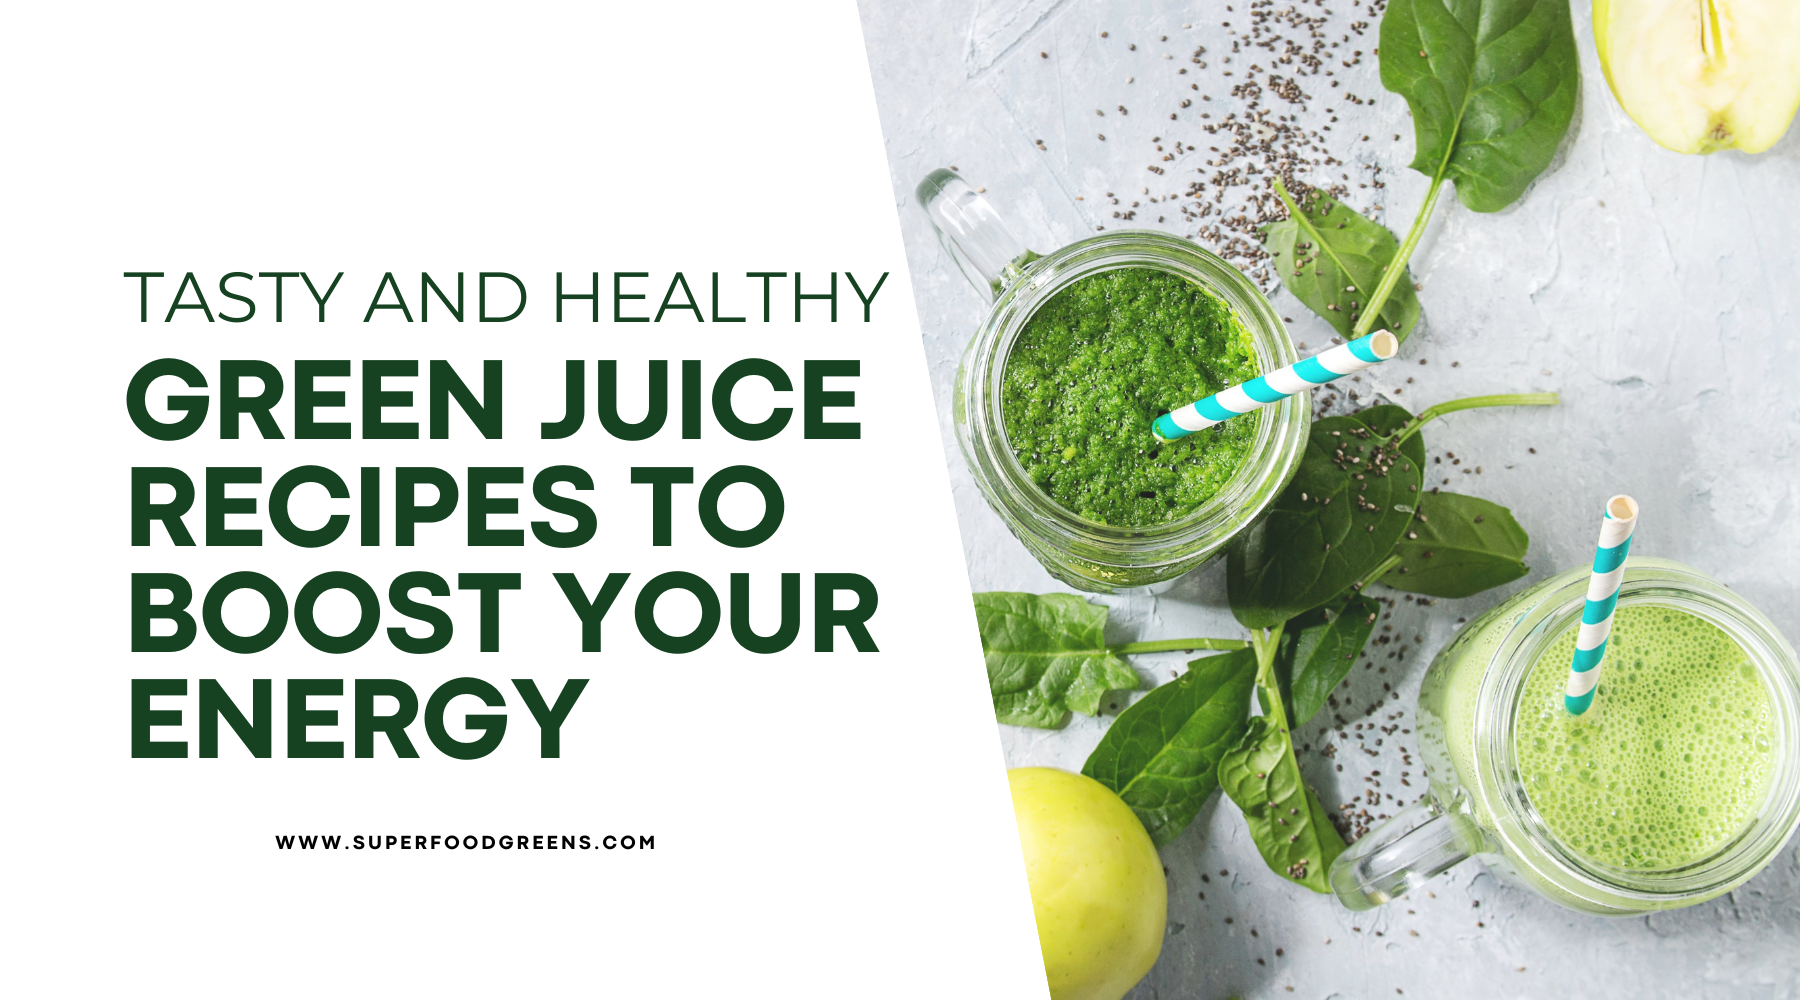 Tasty and Healthy Green Juice Recipes to Boost Your Energy | find vegetarian recipes